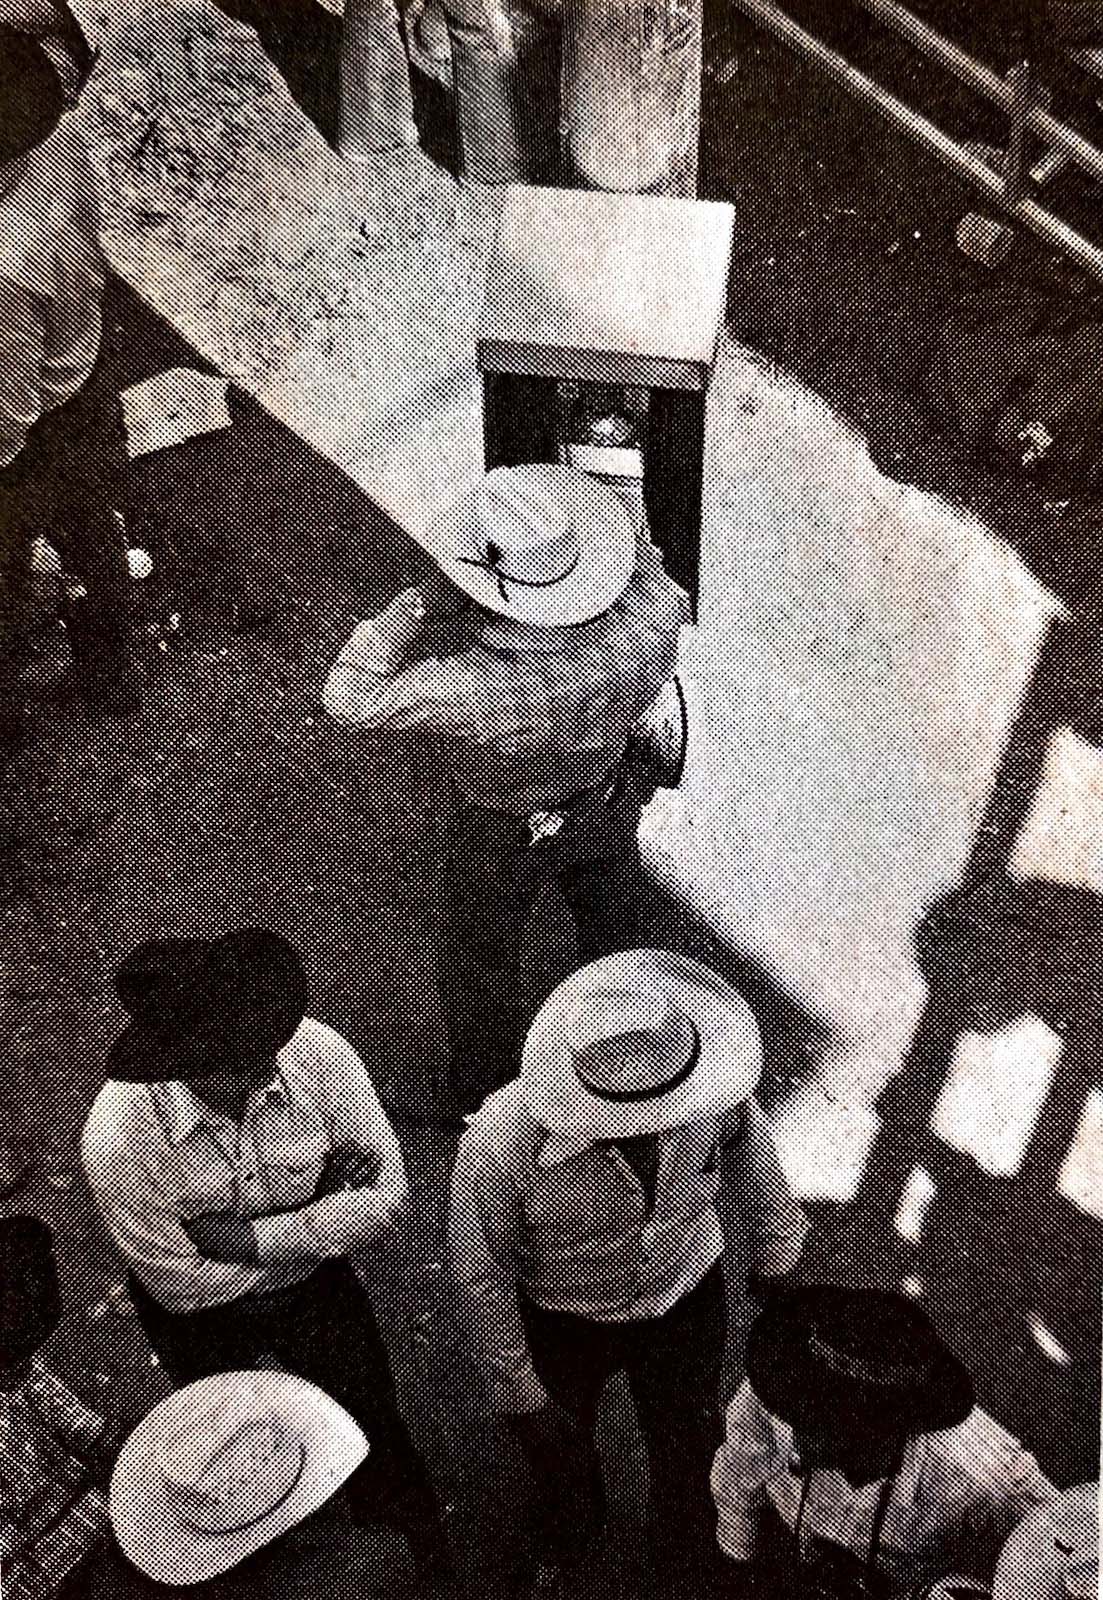 Cowboys behind the chutes at the 1978 Cheyenne Frontier Days.